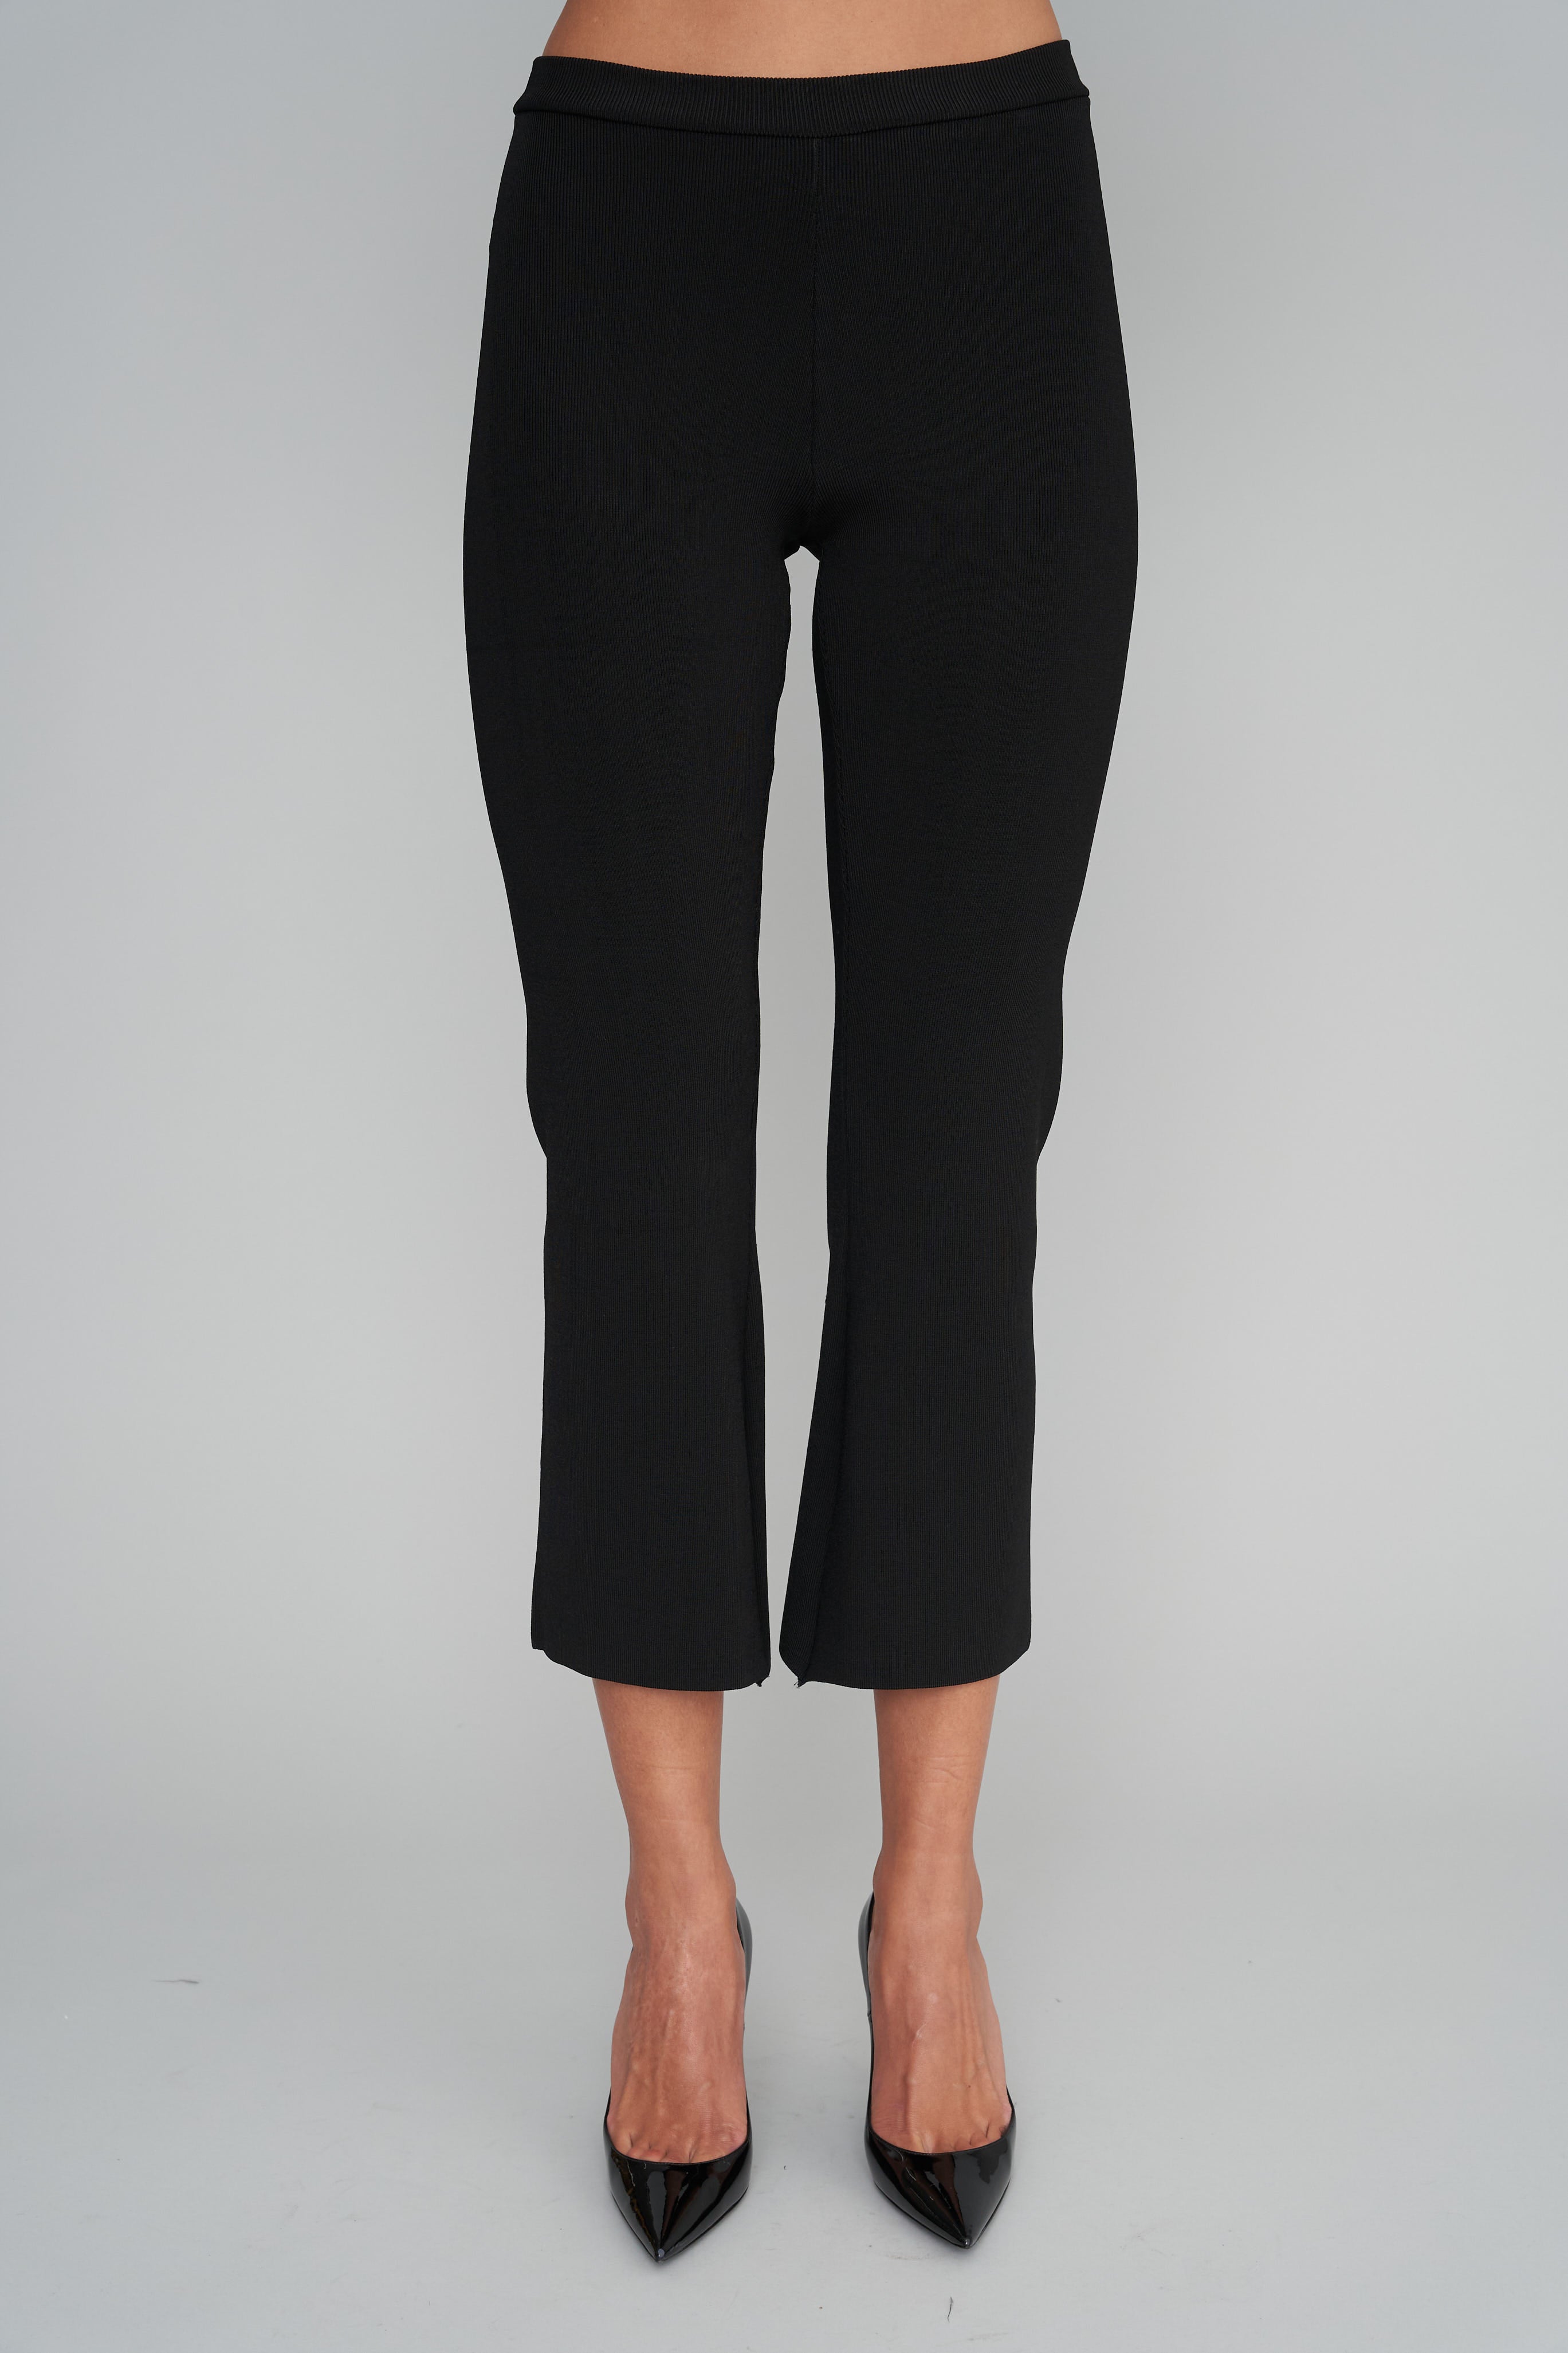 The Broadway Pant